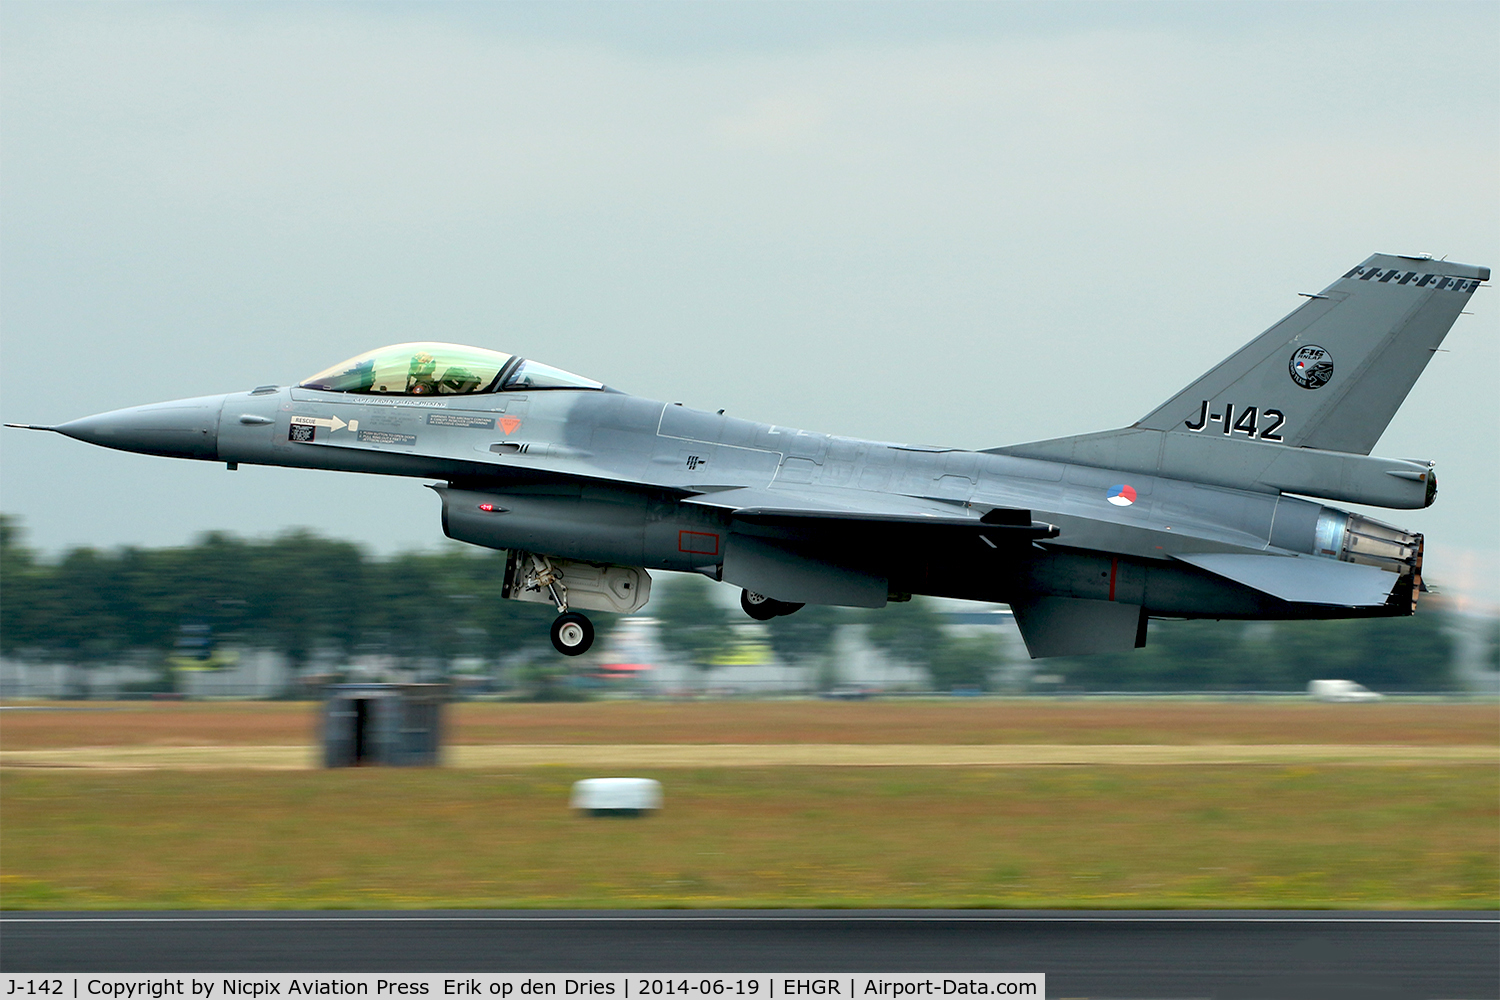 J-142, General Dynamics F-16AM Fighting Falcon C/N 6D-132, J-142 has the Netherlands AF Solo-Display badge applied